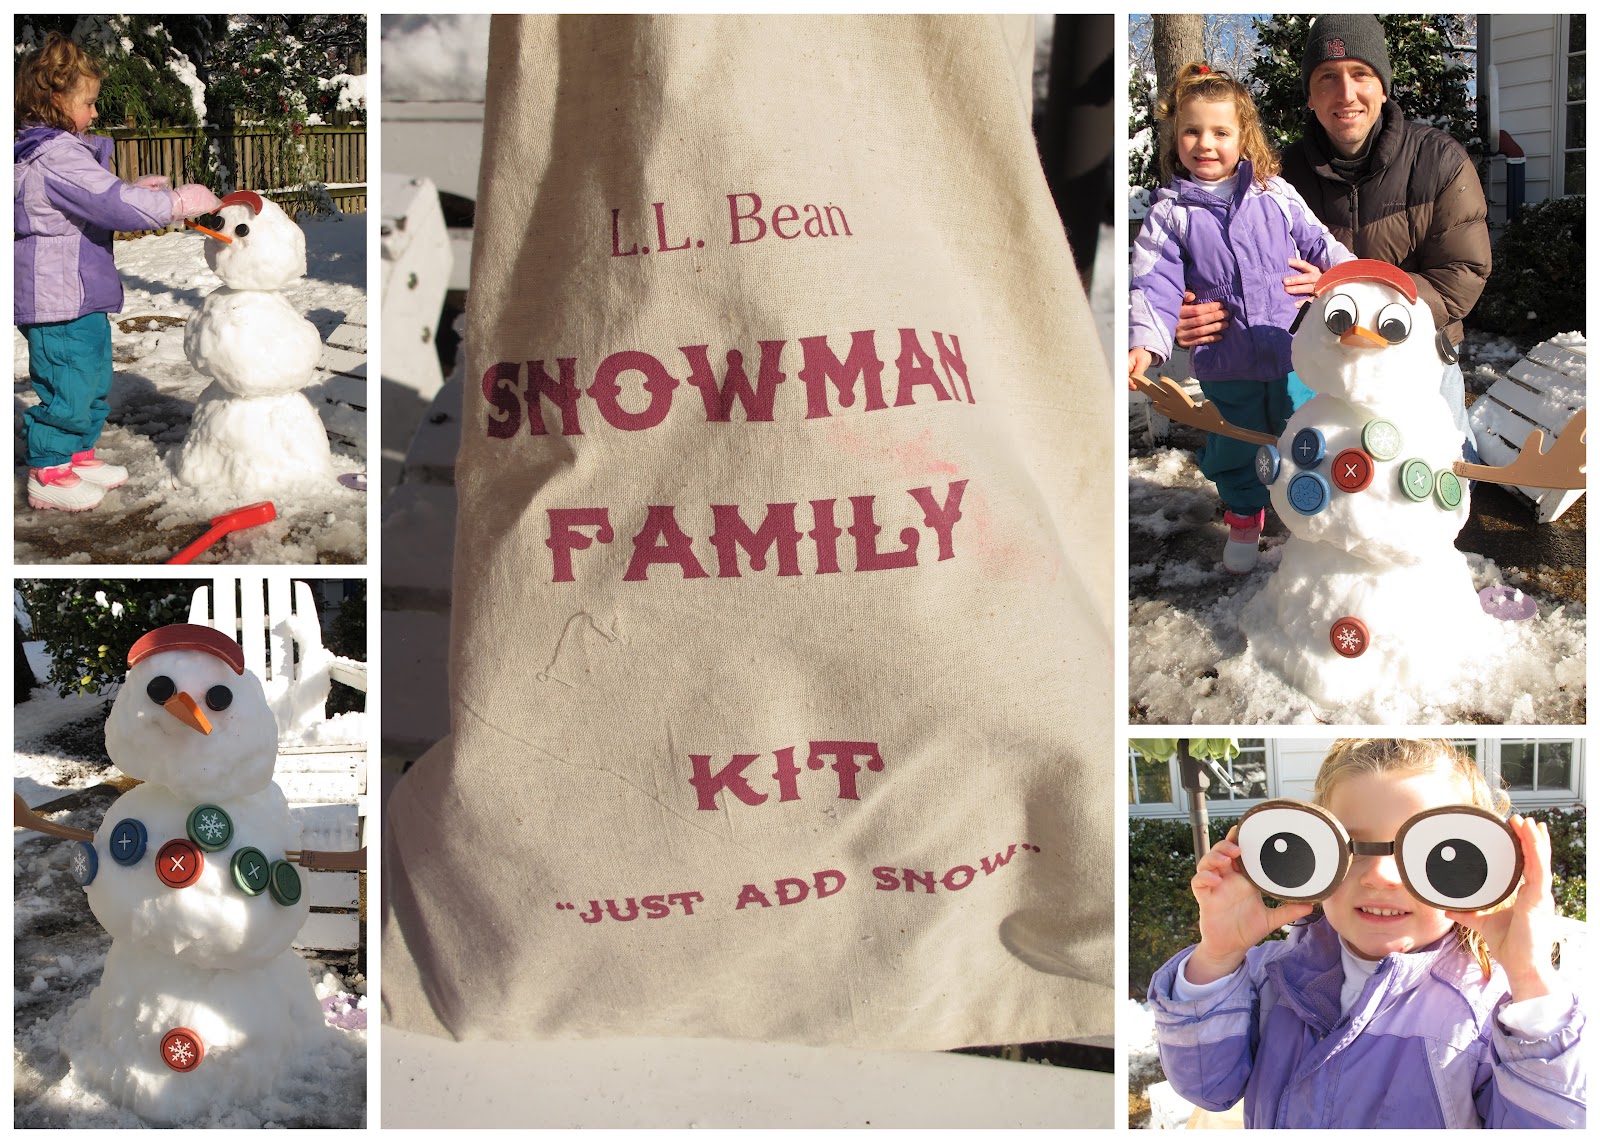 Snowman Family Kit  Games & Outdoor Toys at L.L.Bean